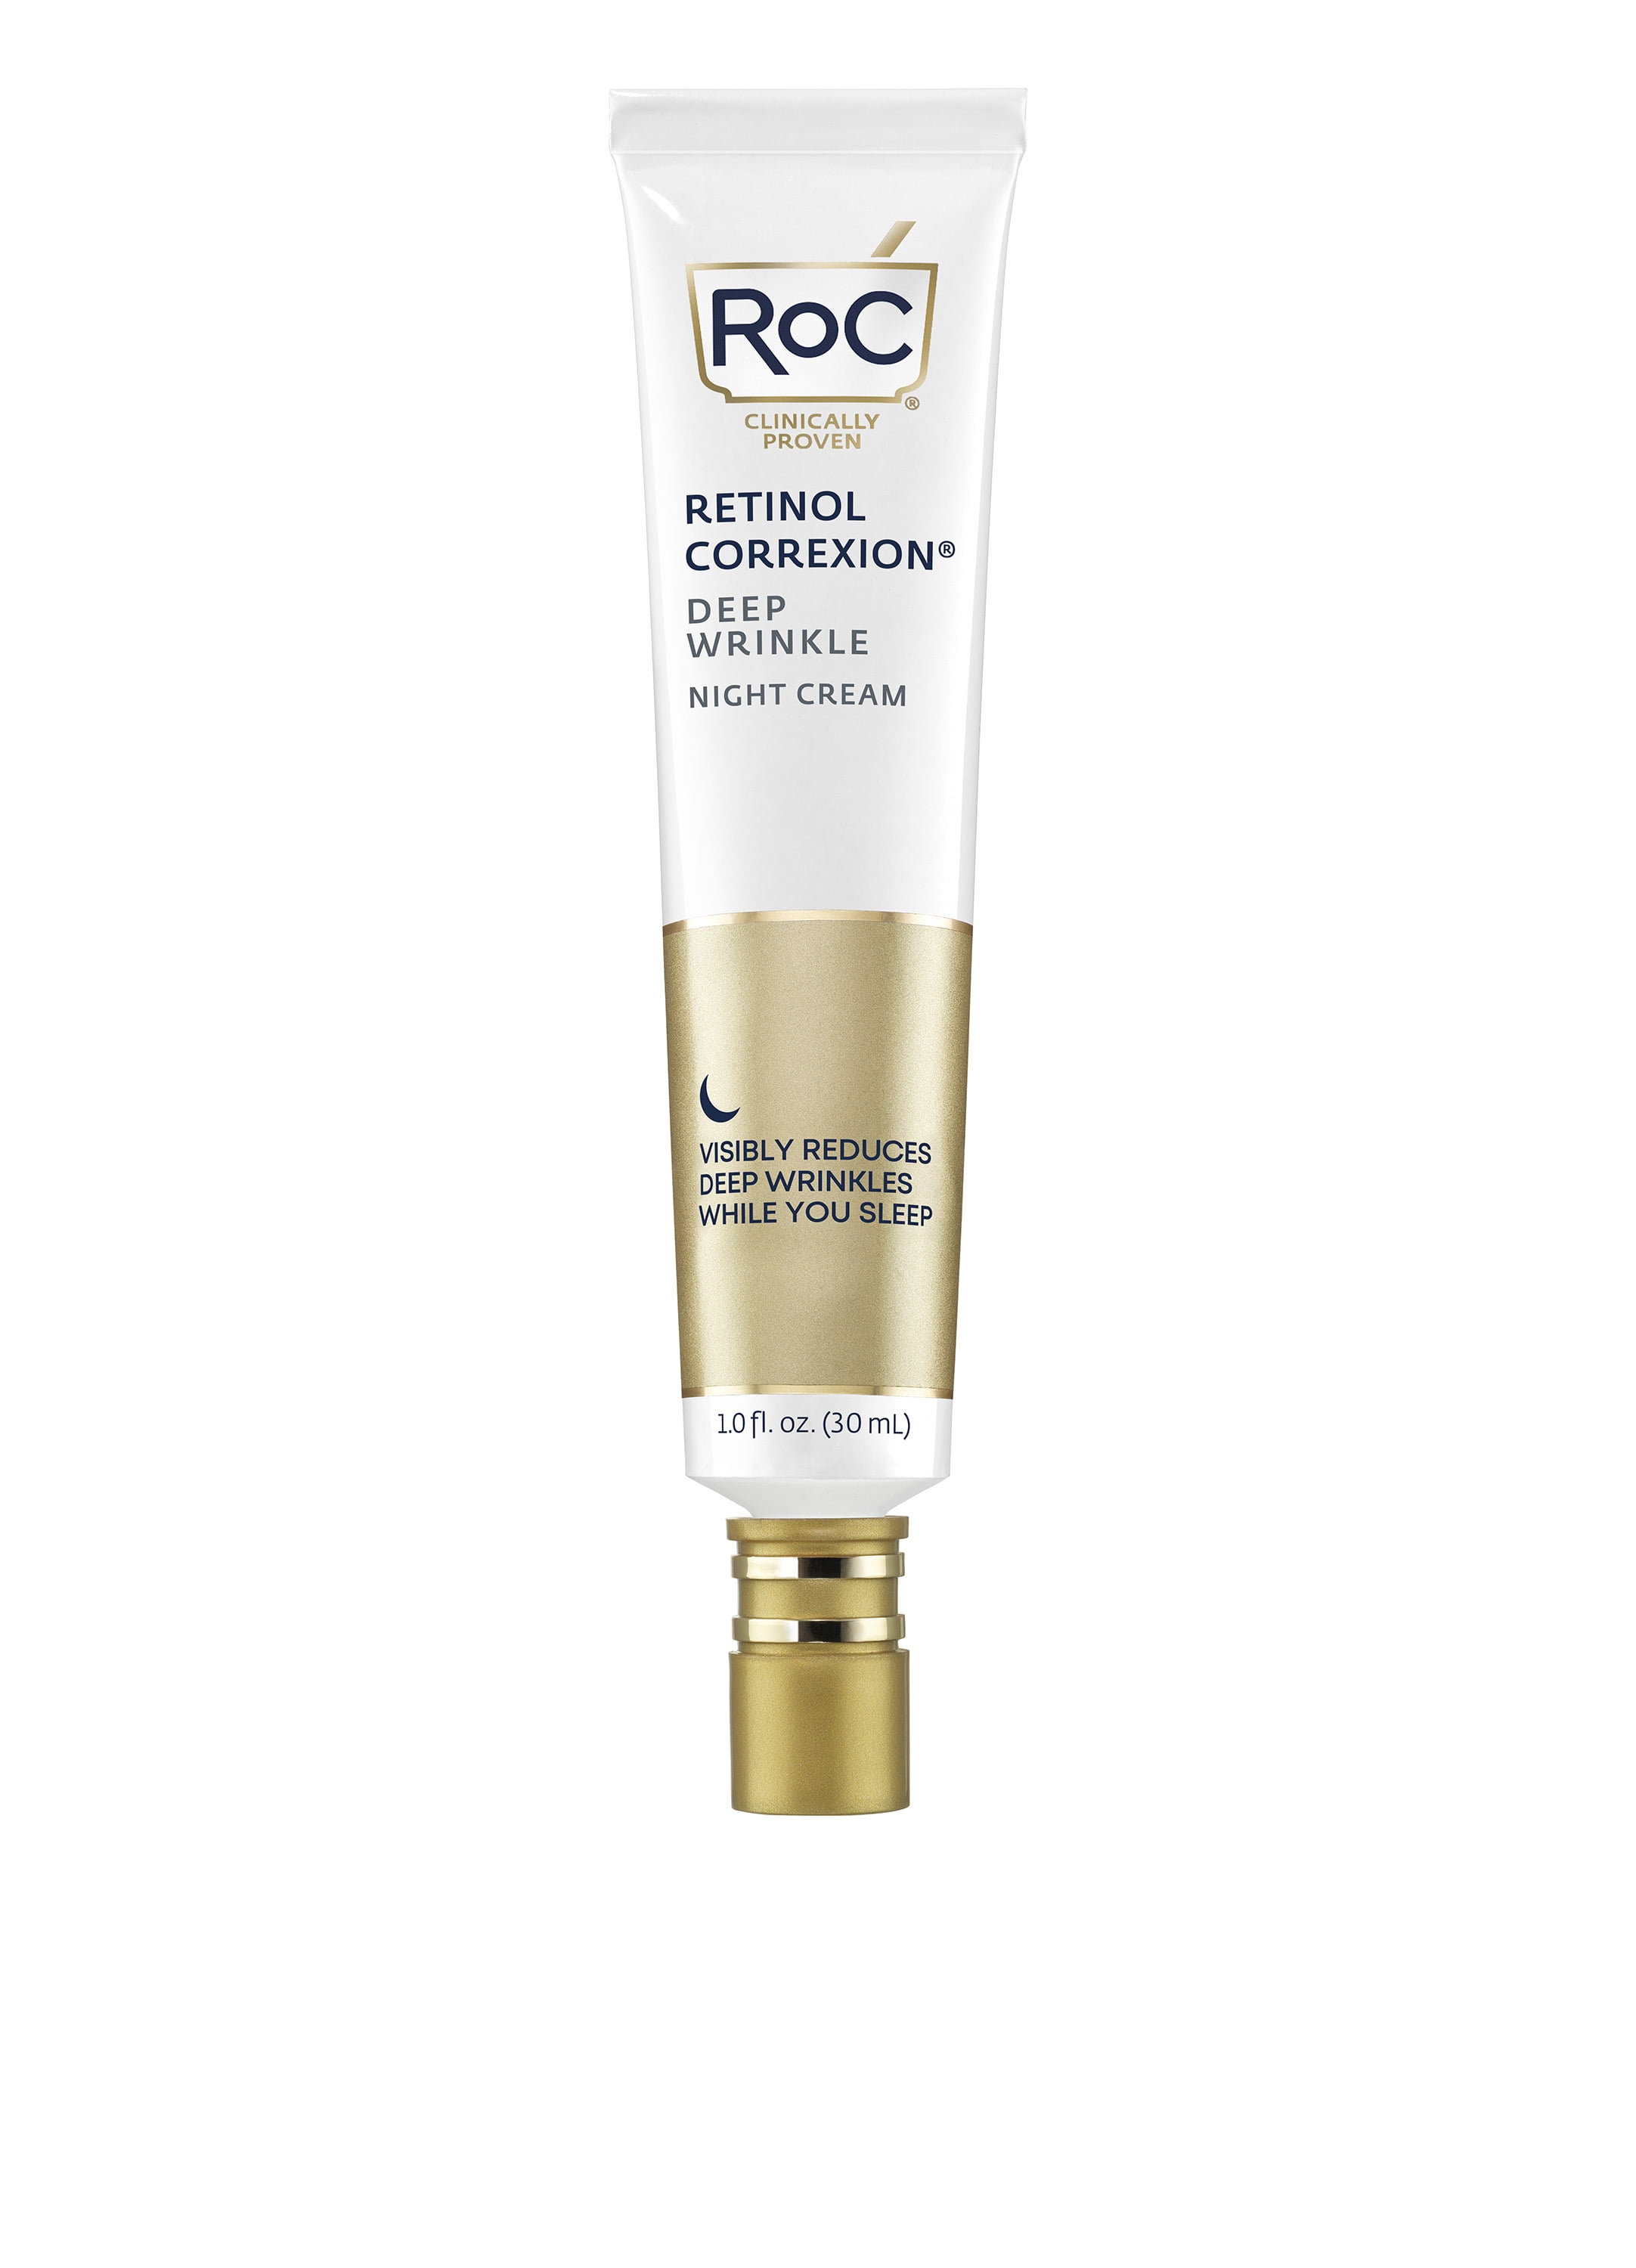 roc retinol correxion deep wrinkle night cream before and after)